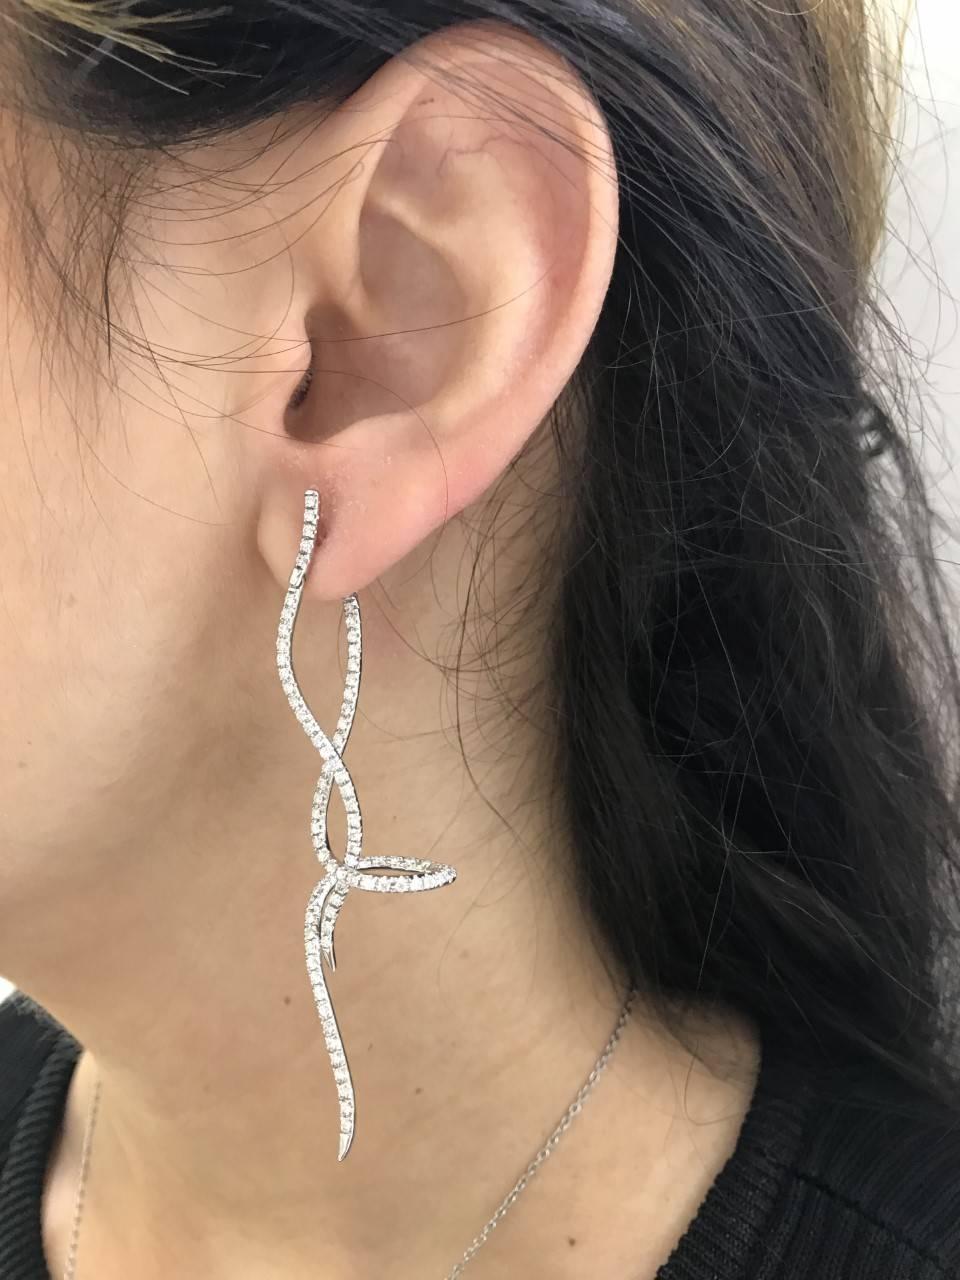 Delicate 18 Karat White Gold Swirls create these enchanting 1.75 Carat Diamond Earrings color H clarity SI. Elegantly crafted into smooth contours and encrusted with luminous White Round Brilliant Diamonds. British Hallmarked. Available in Rose and